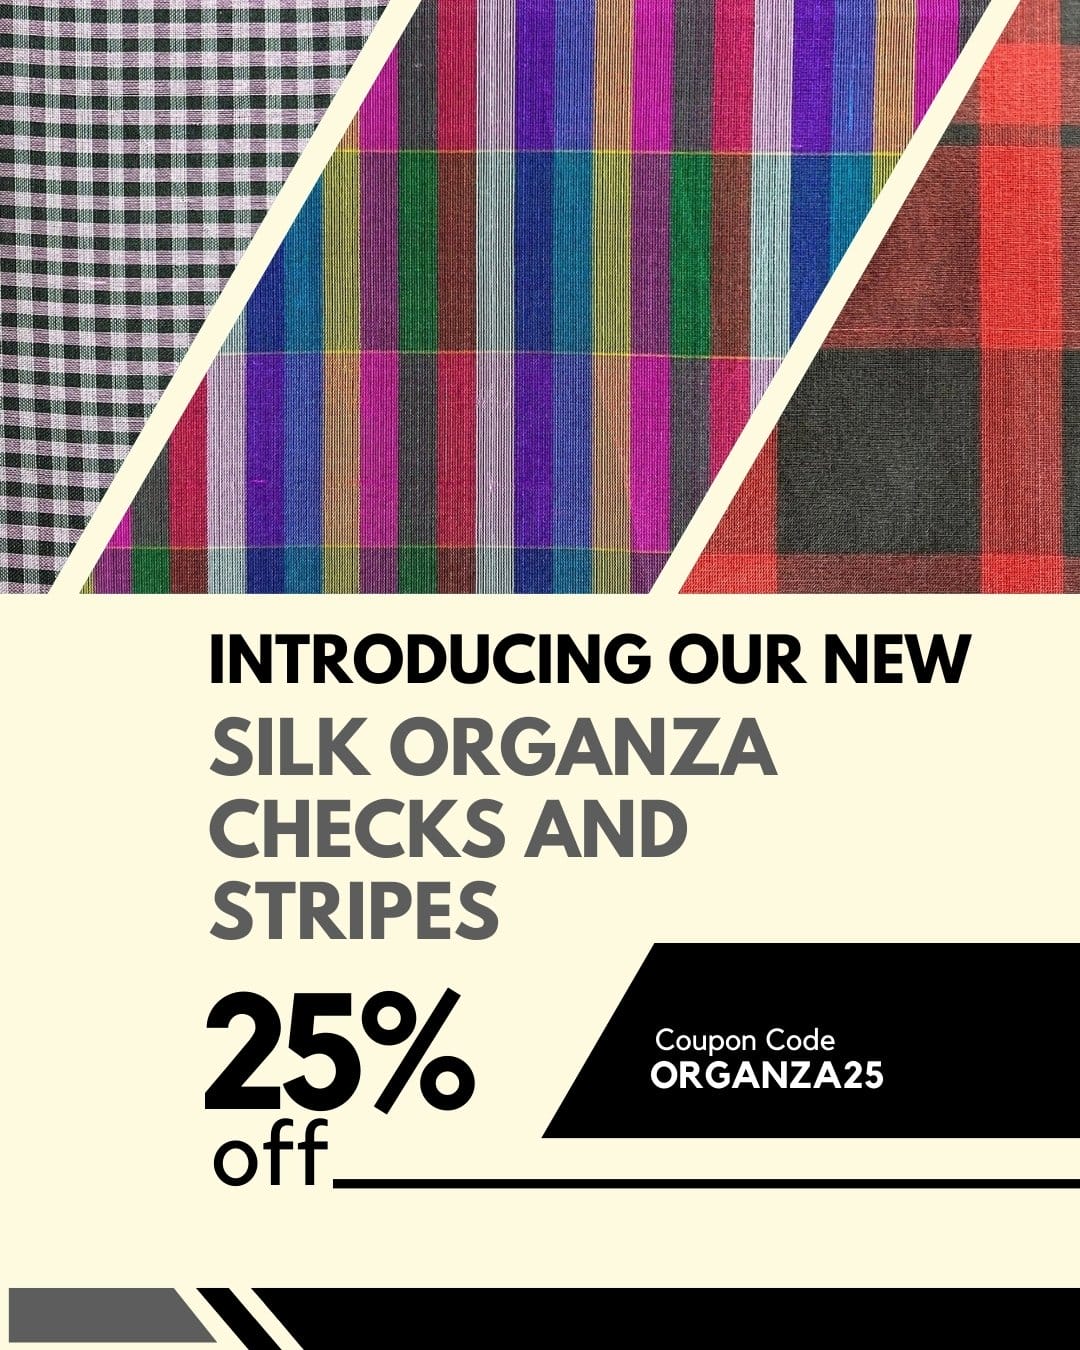 Introducing 25% off to Our New Silk Organza Checks and Stripes